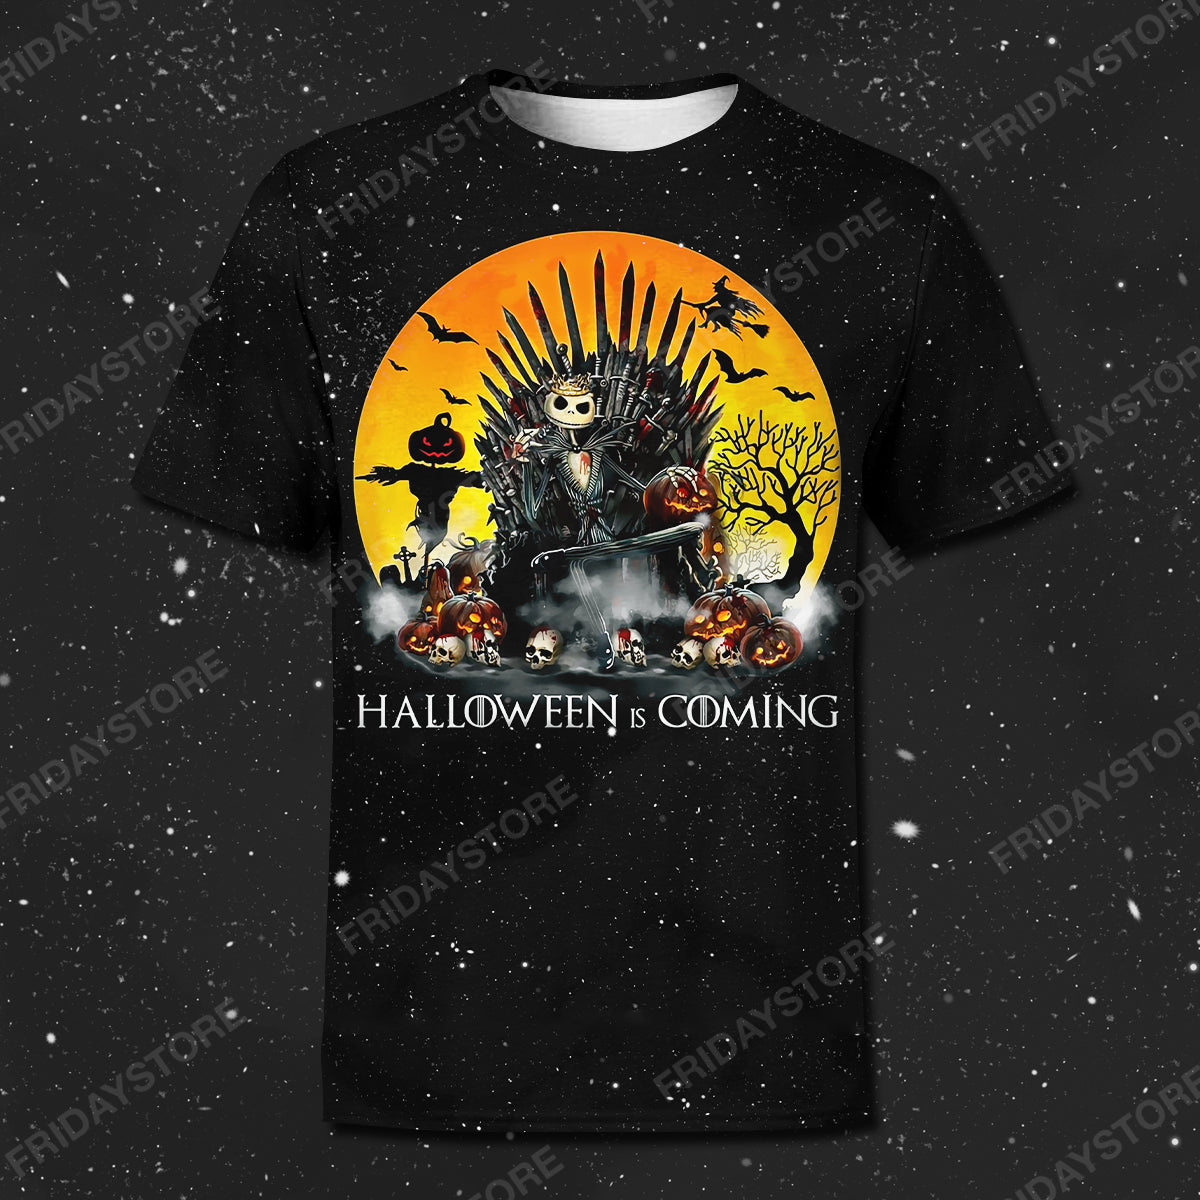 Unifinz TNBC T-shirt Jack Skellington On The Throne Halloween Is Coming T-shirt Cool Awesome TNBC Hoodie Sweater Tank 2025